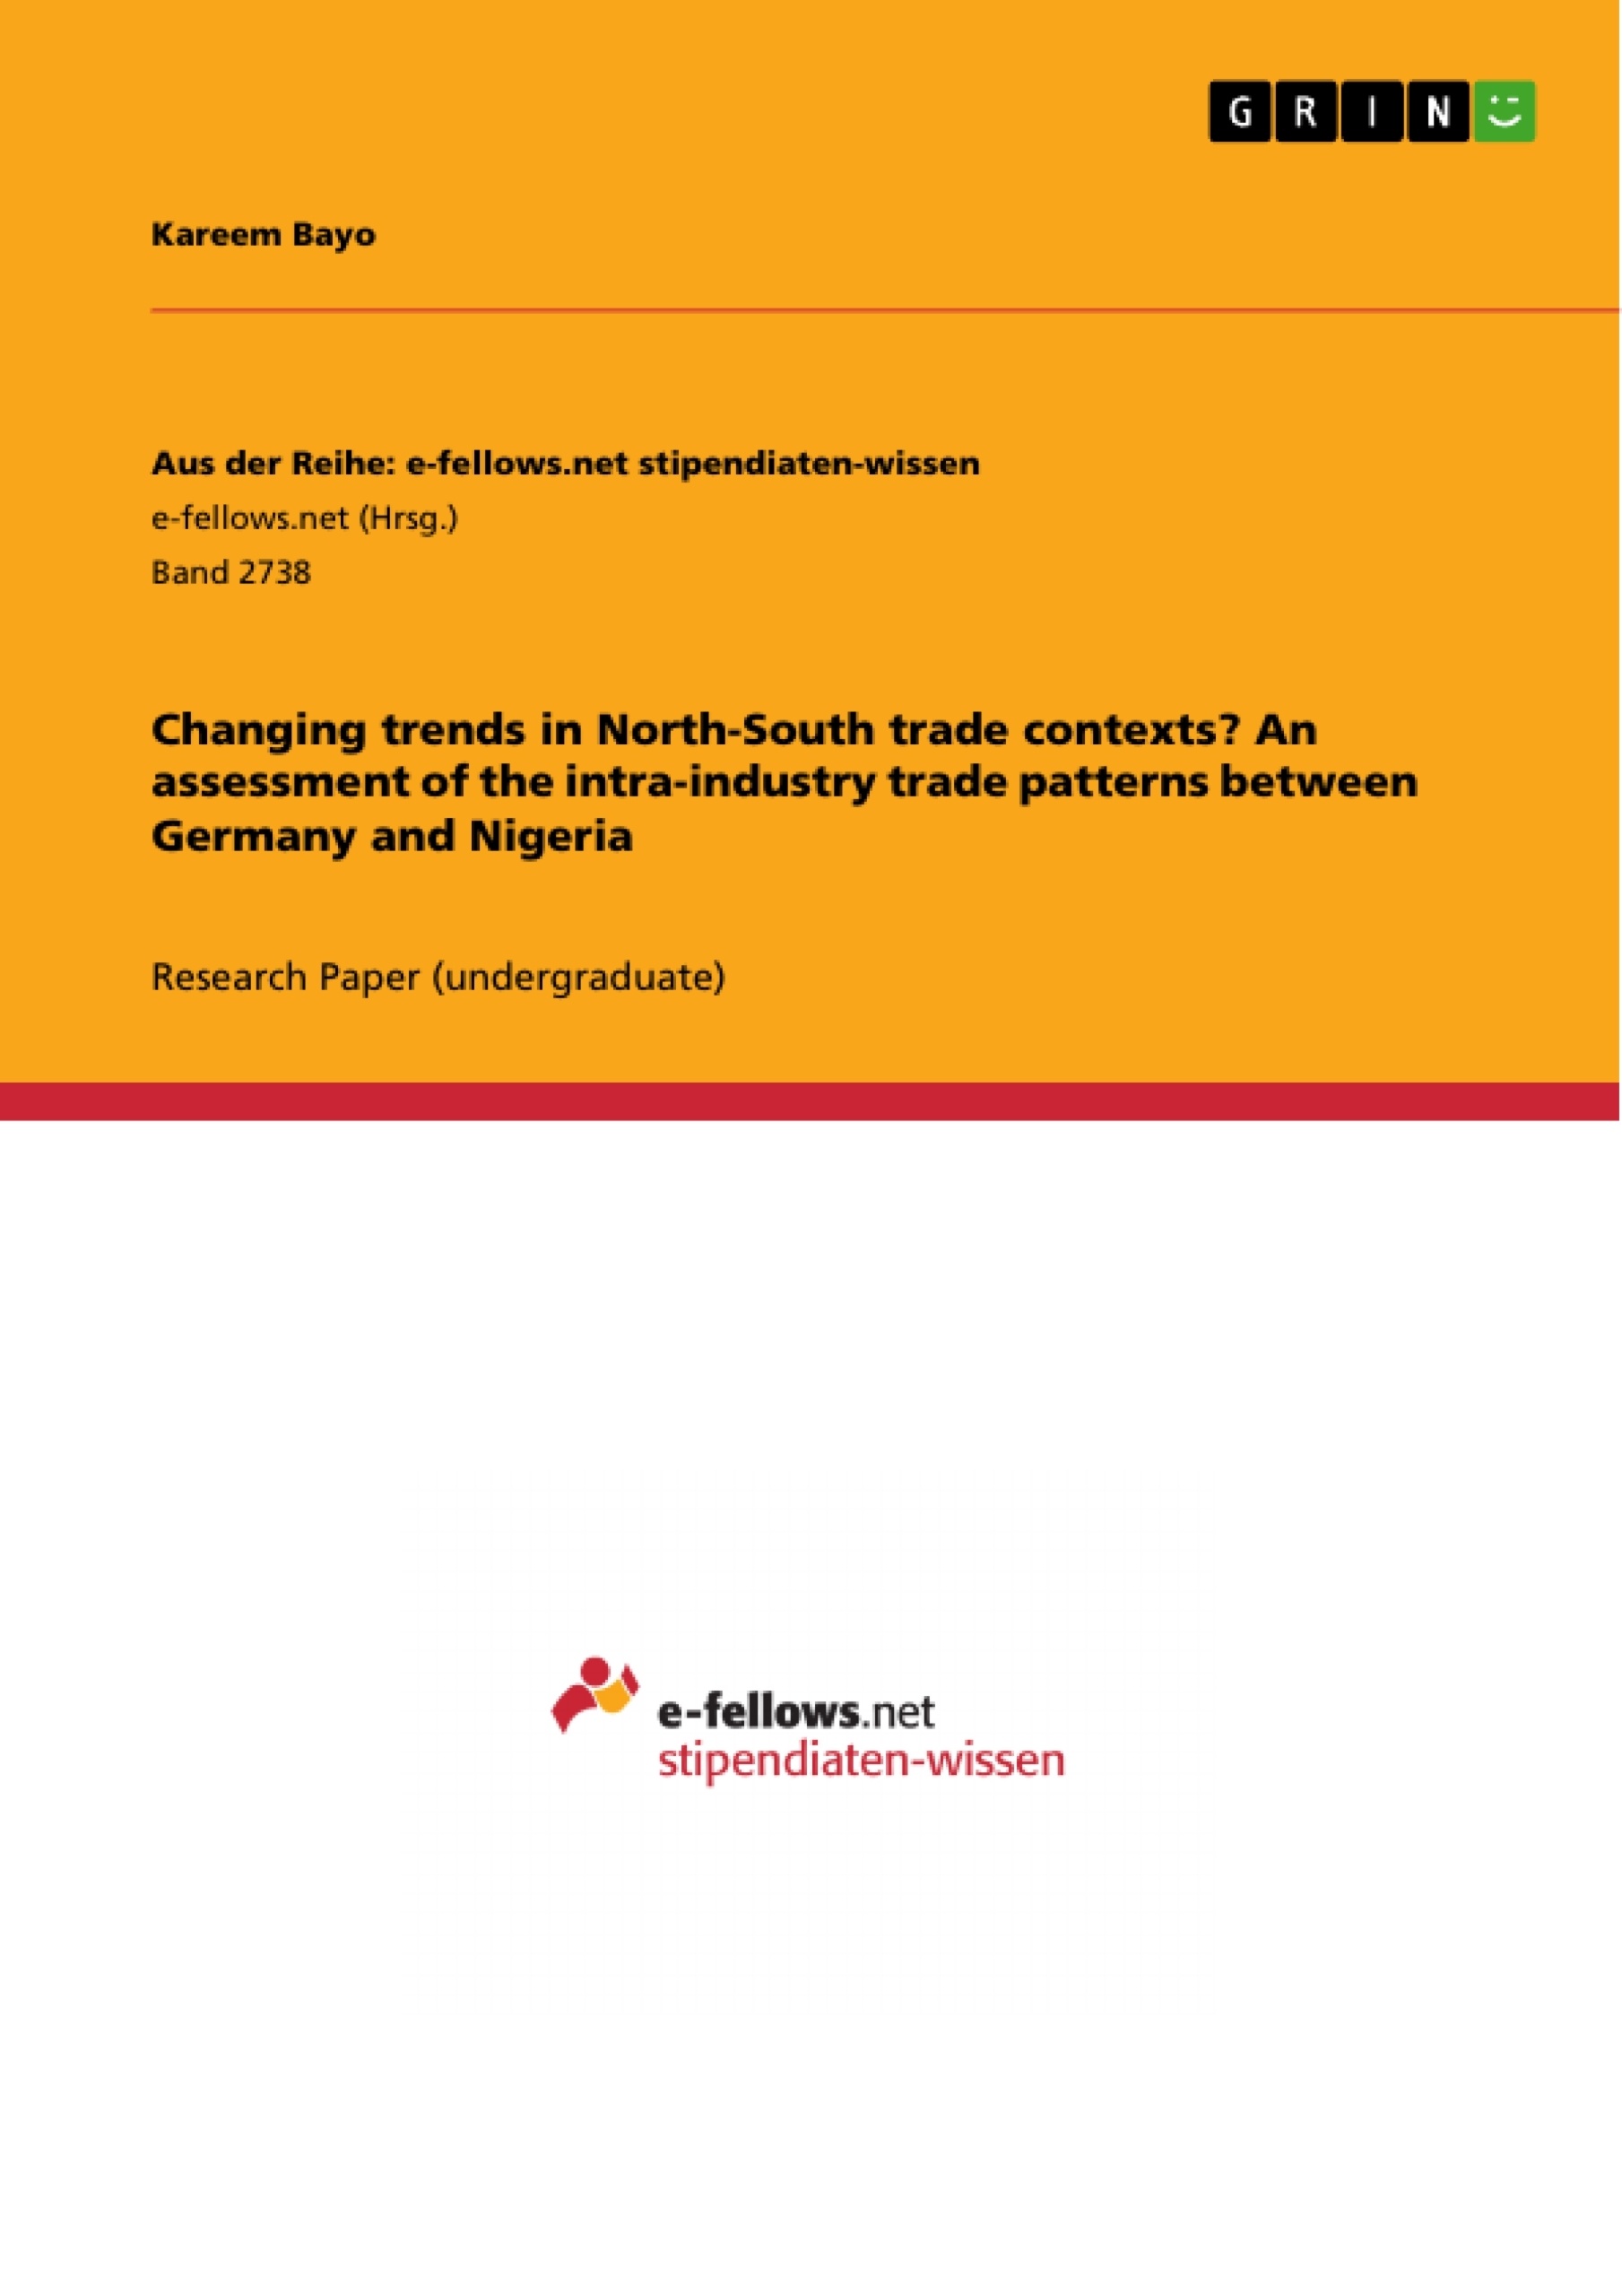 Title: Changing trends in North-South trade contexts? An assessment of the intra-industry trade patterns between Germany and Nigeria